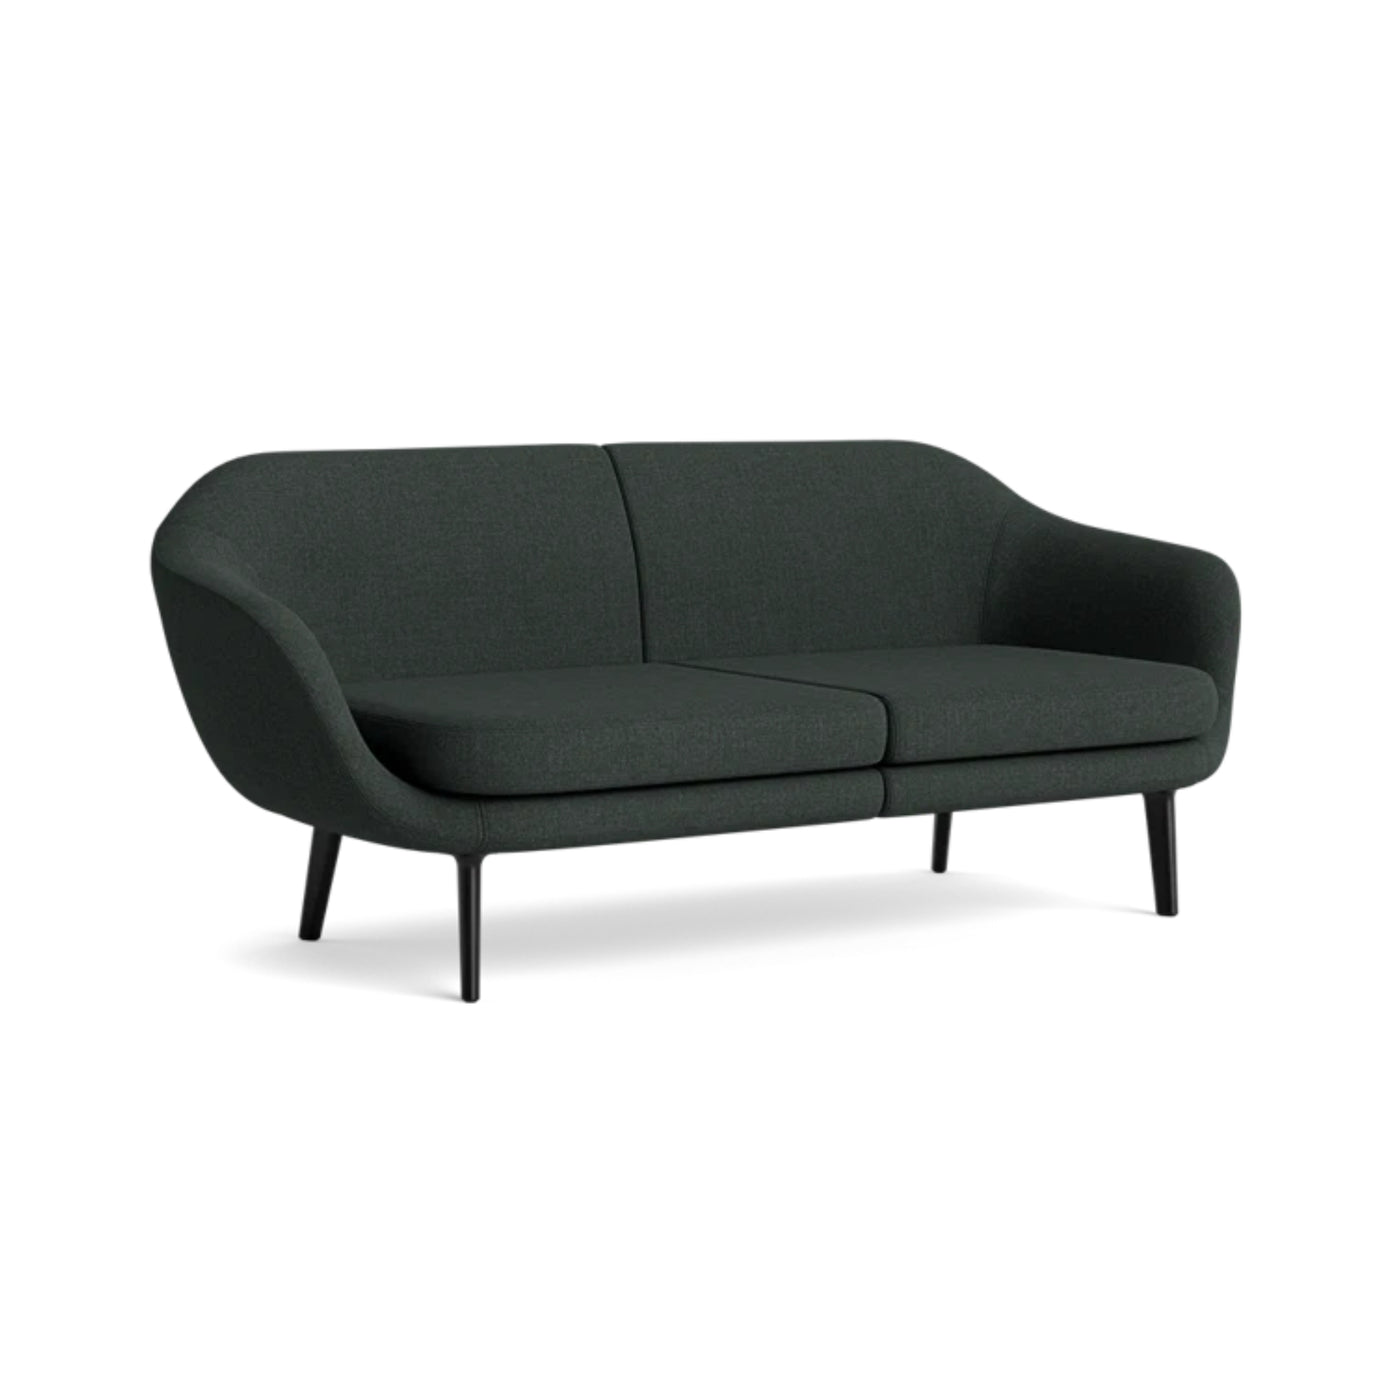 Normann Copenhagen Sum Modular 2 Seater Sofa. Made to order from someday designs. #colour_remix-973